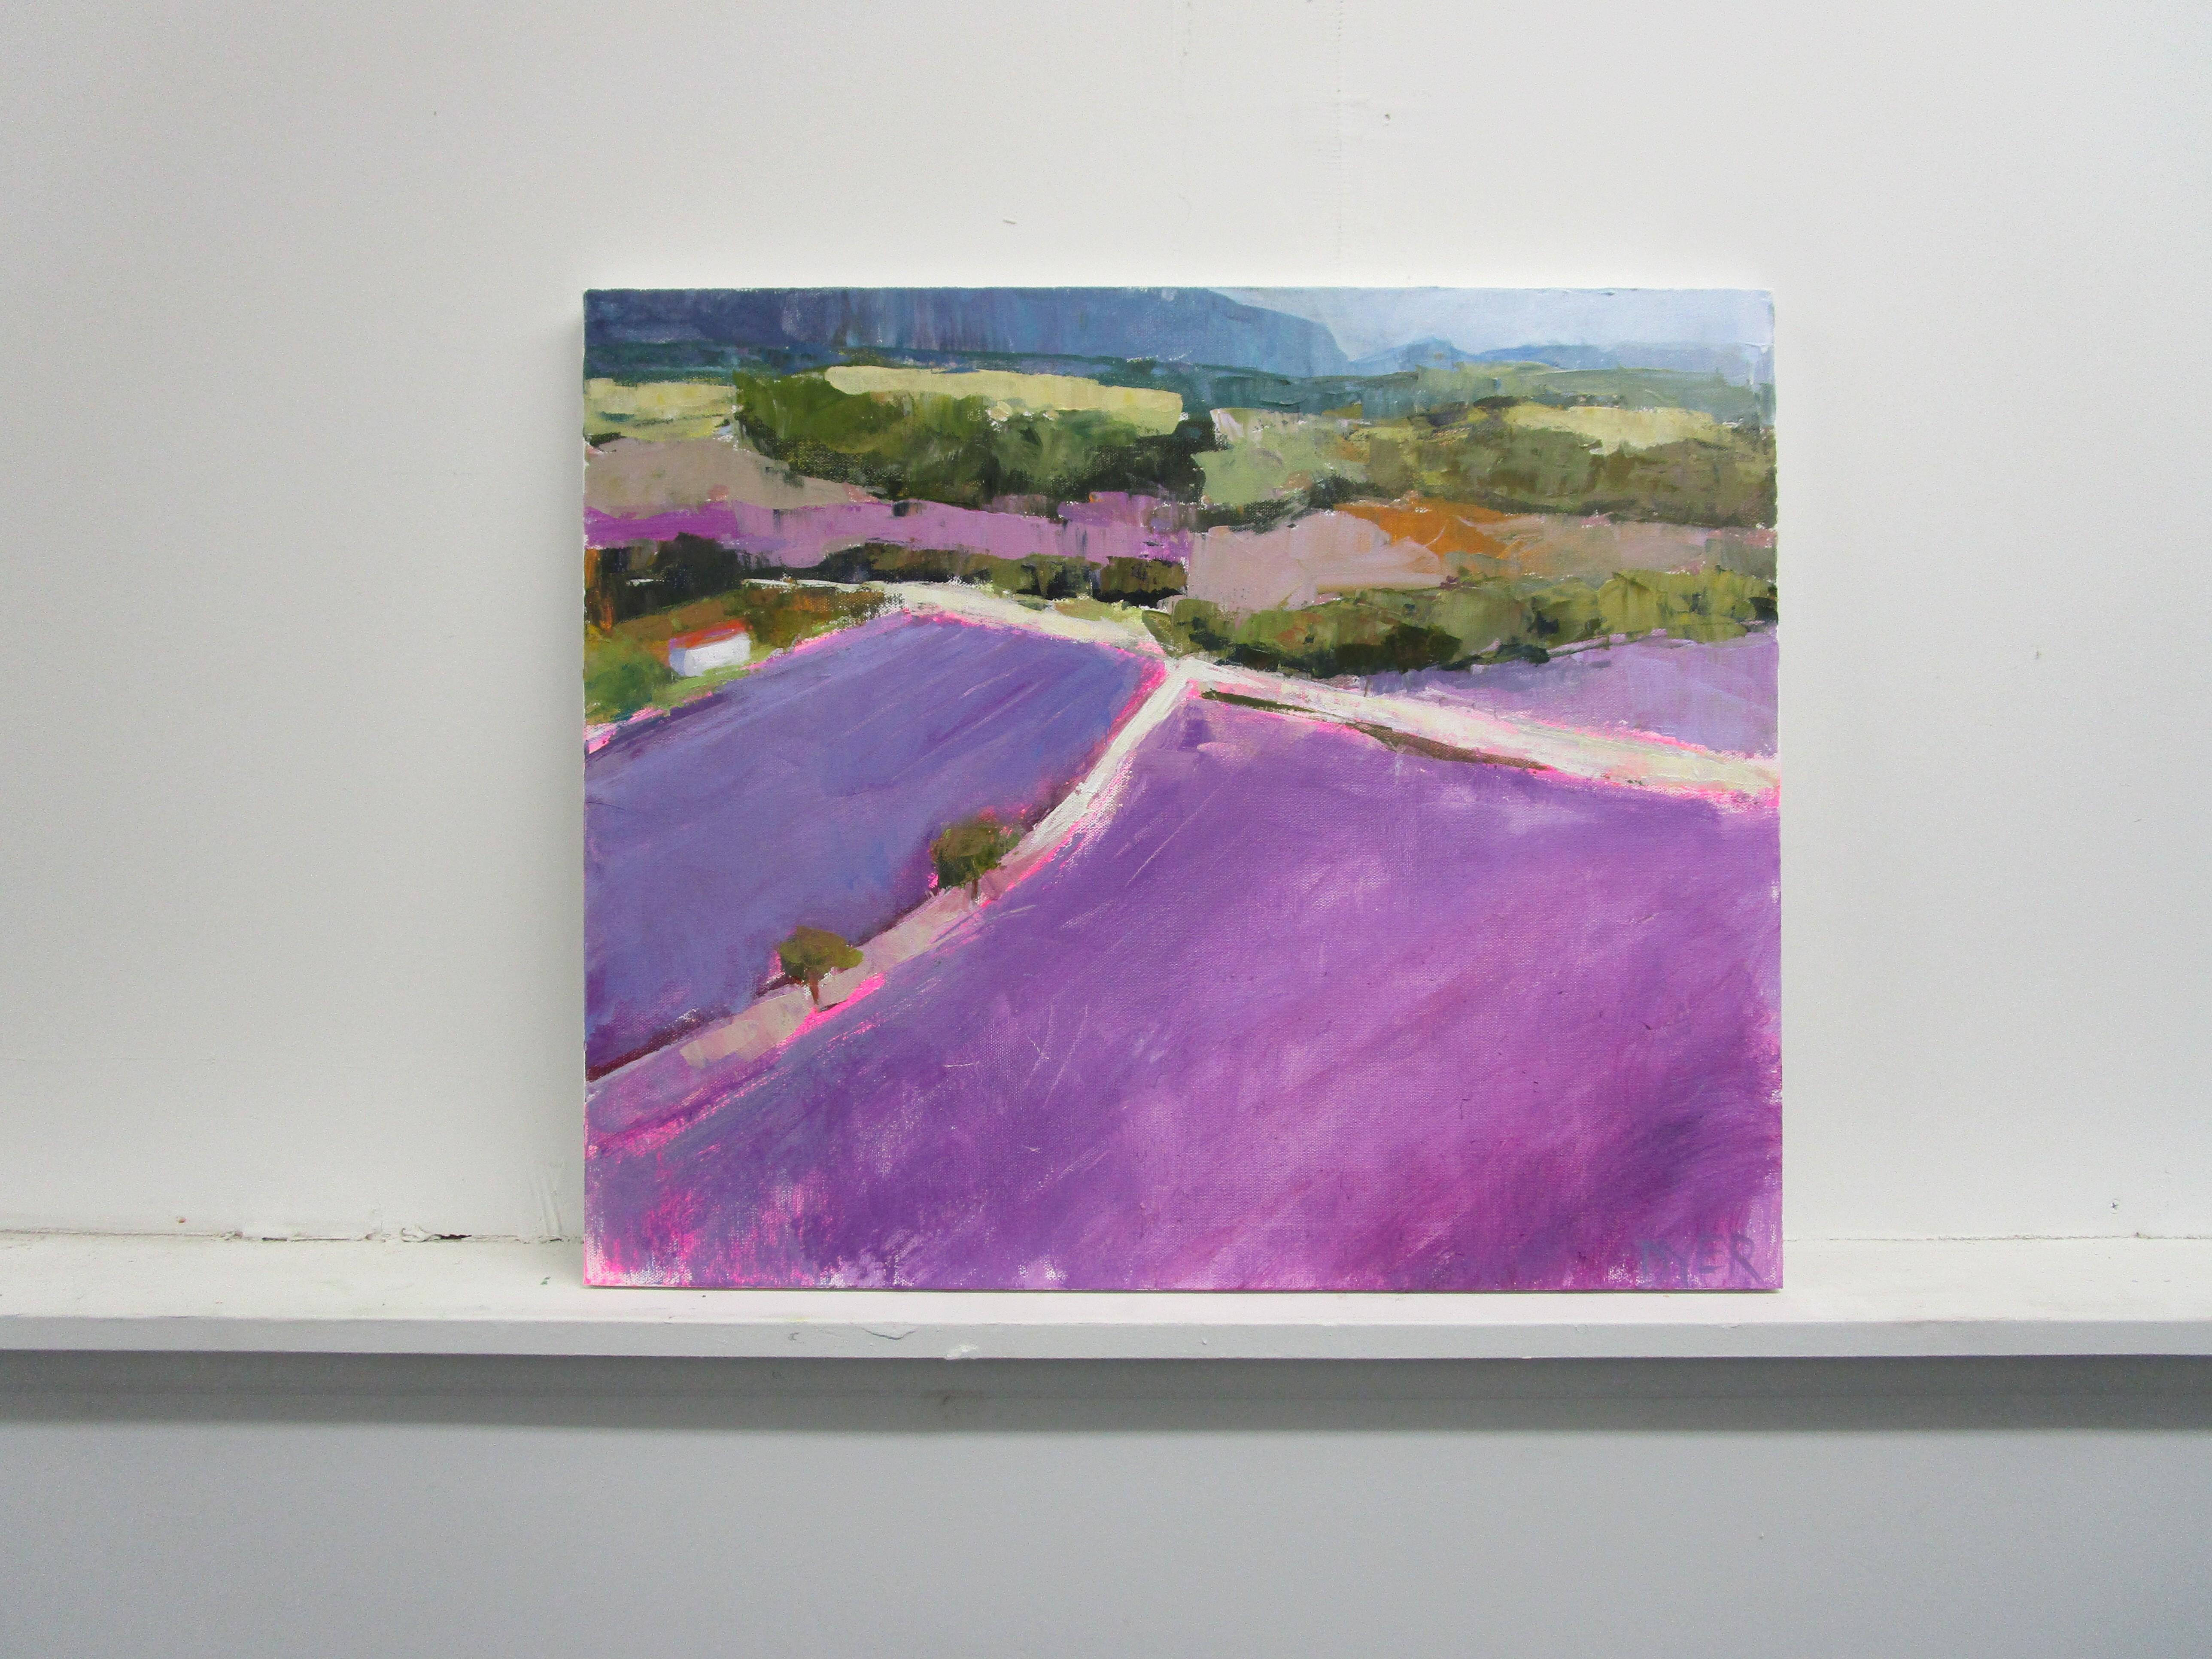 <p>Artist Comments<br>A lush expanse of lavender fields in Provence, France. Artist Janet Dyer depicts this countryside view with varying shades of violet perfectly balanced by the greens of the surrounding terrain. A softer abstracted view of trees